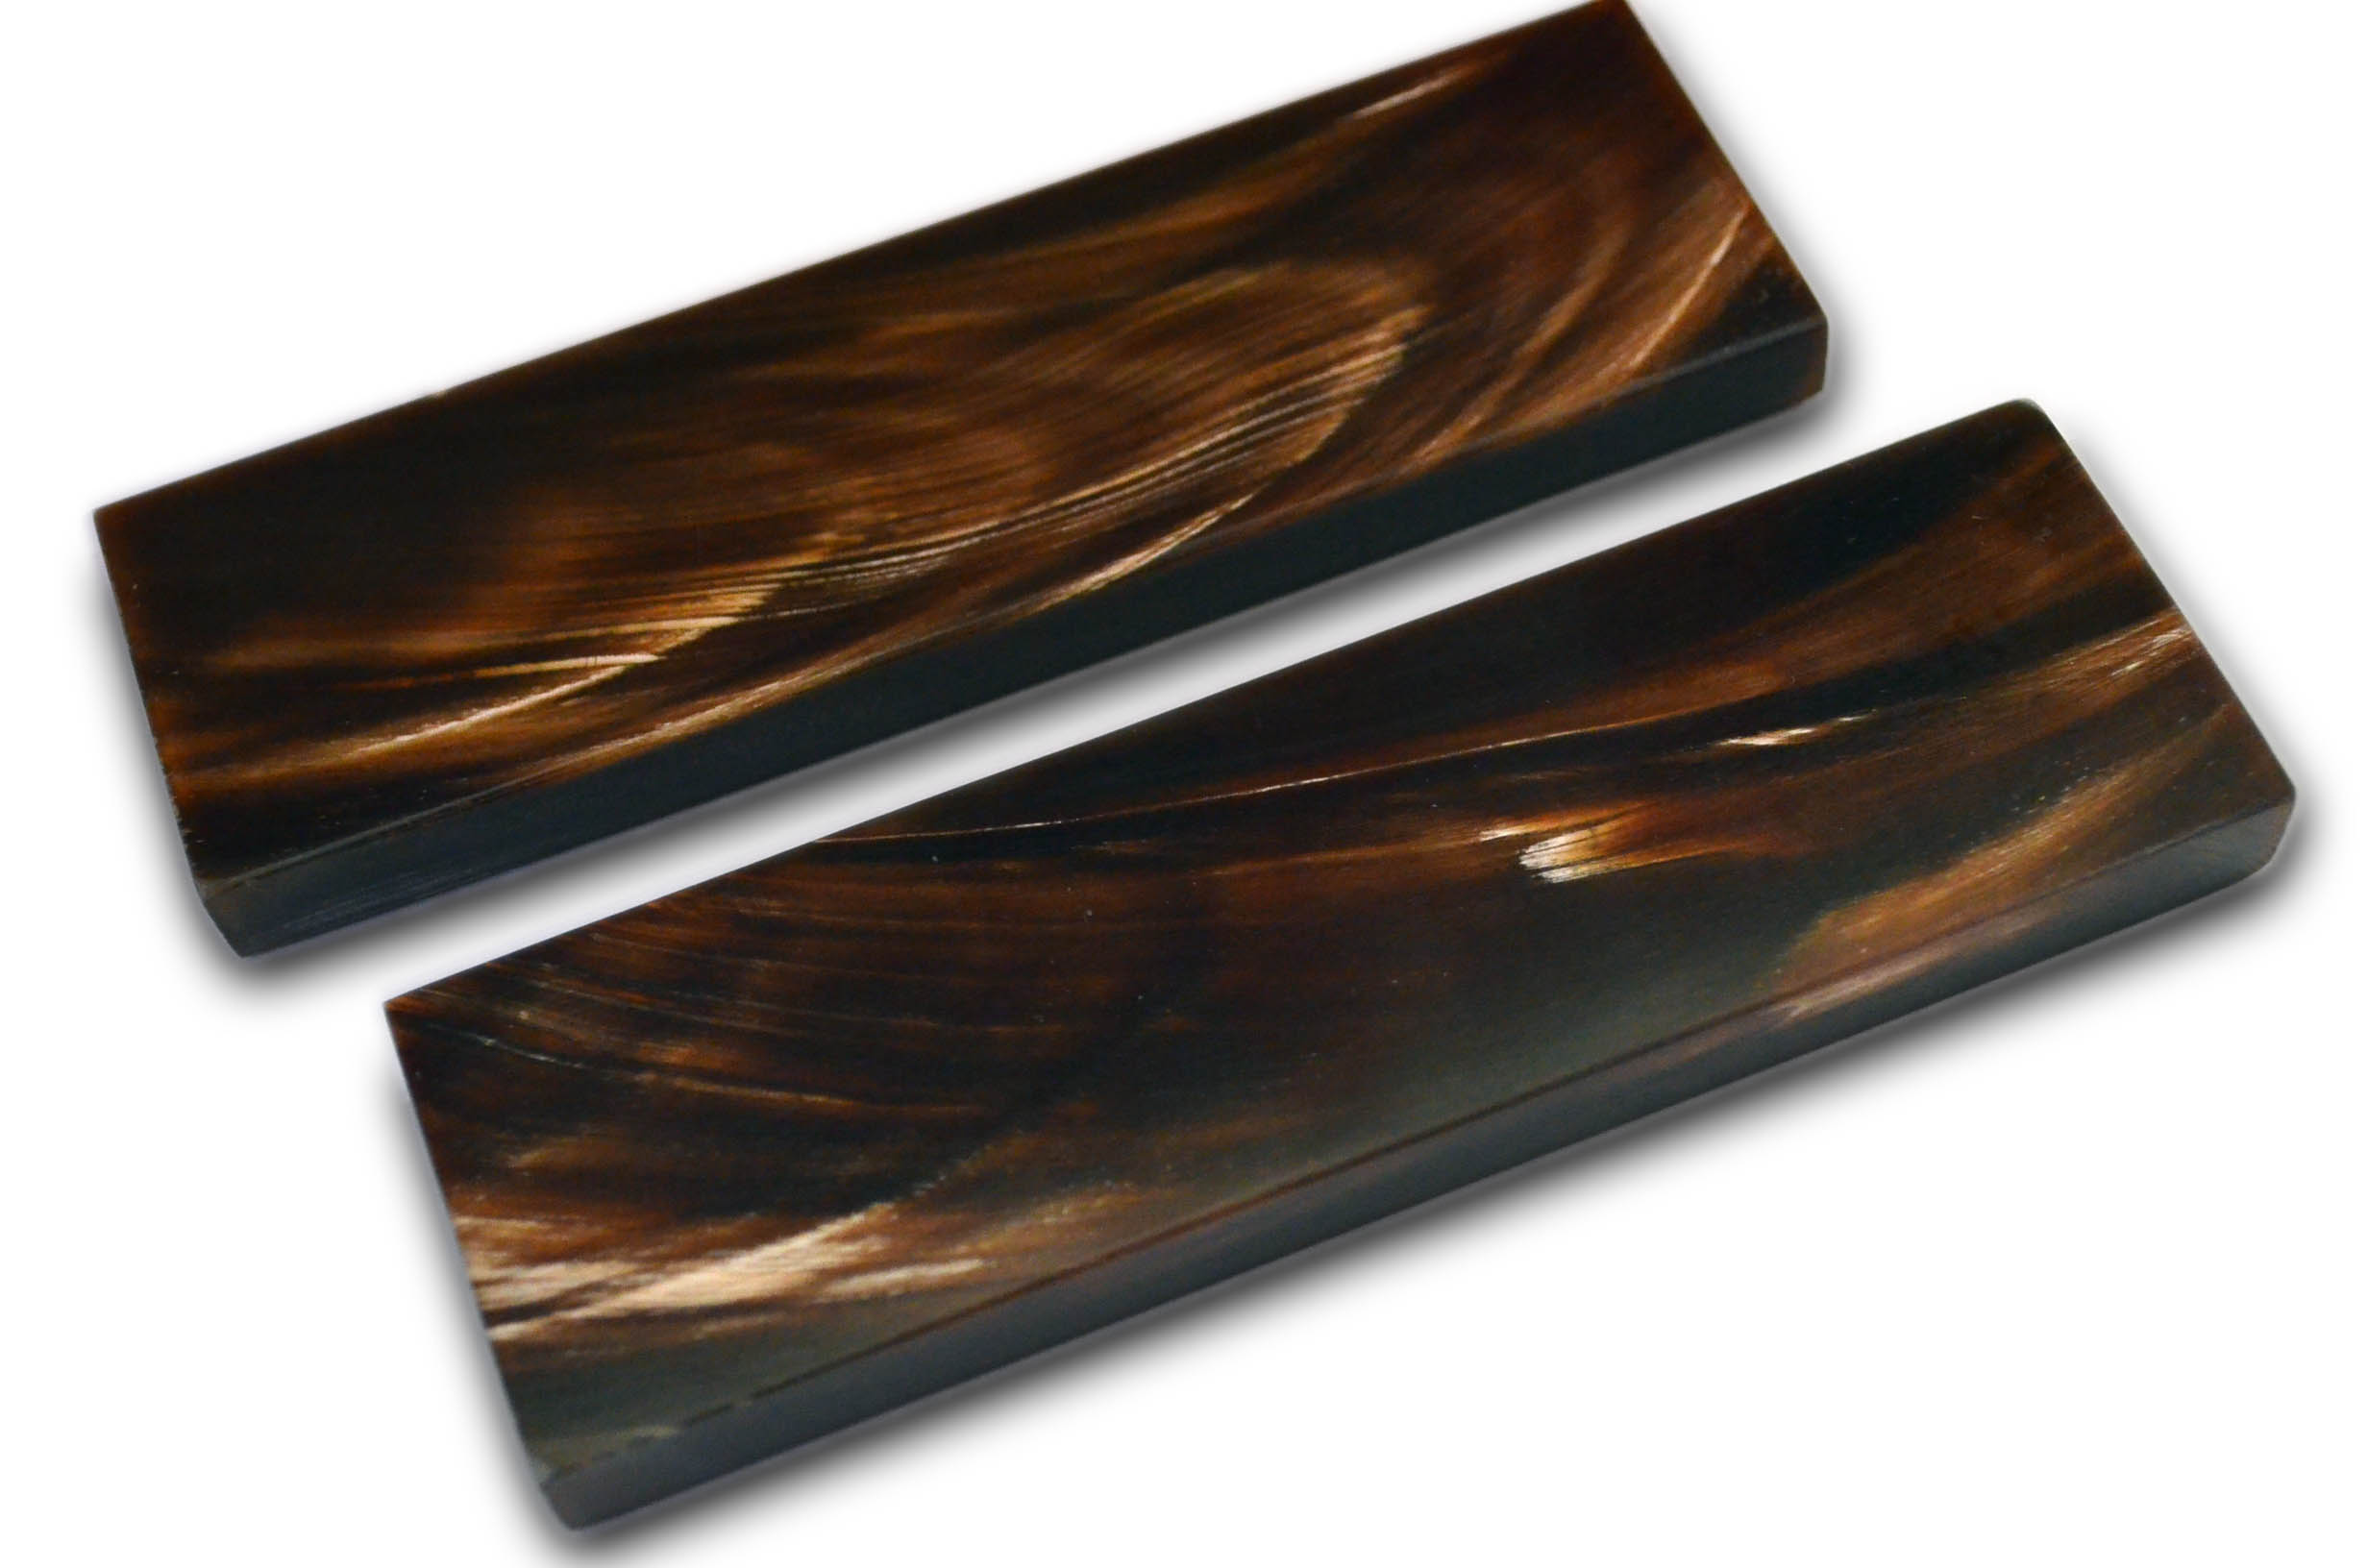 5 inch Brown Buffalo Horn Brown Streaks Scales Handle Set Pair Handles Material for Knife Making Blanks Blades Grips Knives